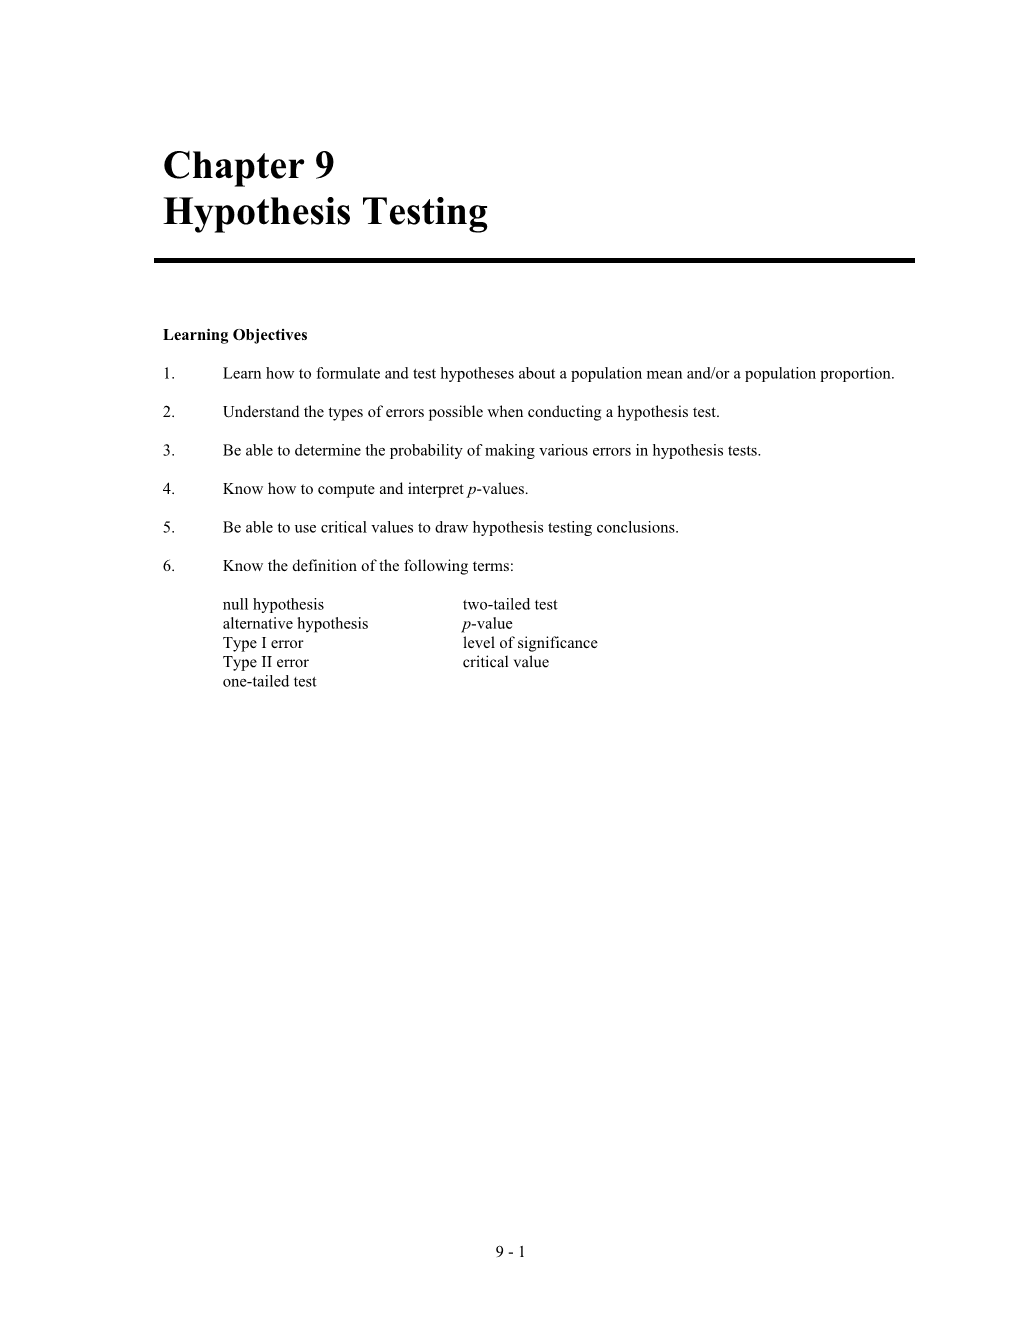 Hypothesis Testing s1